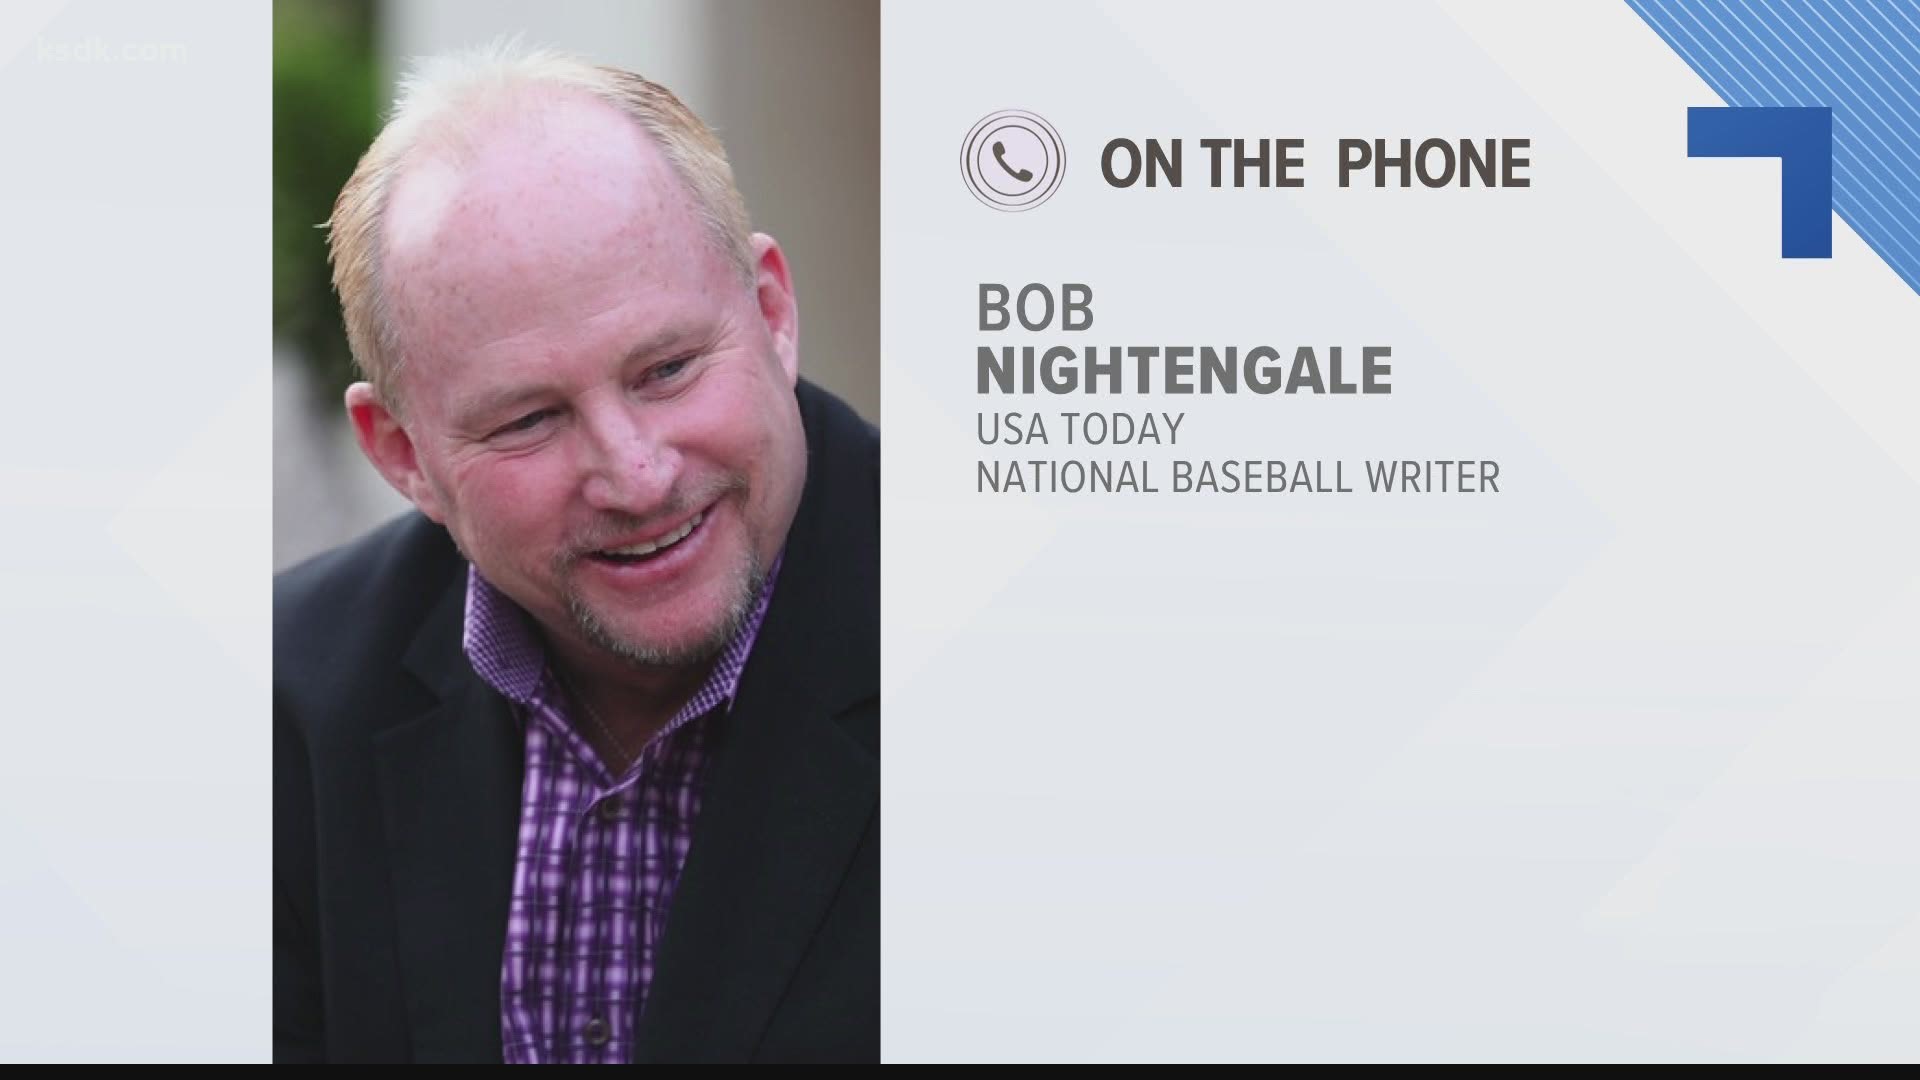 USA Today's Bob Nightengale weighs in.